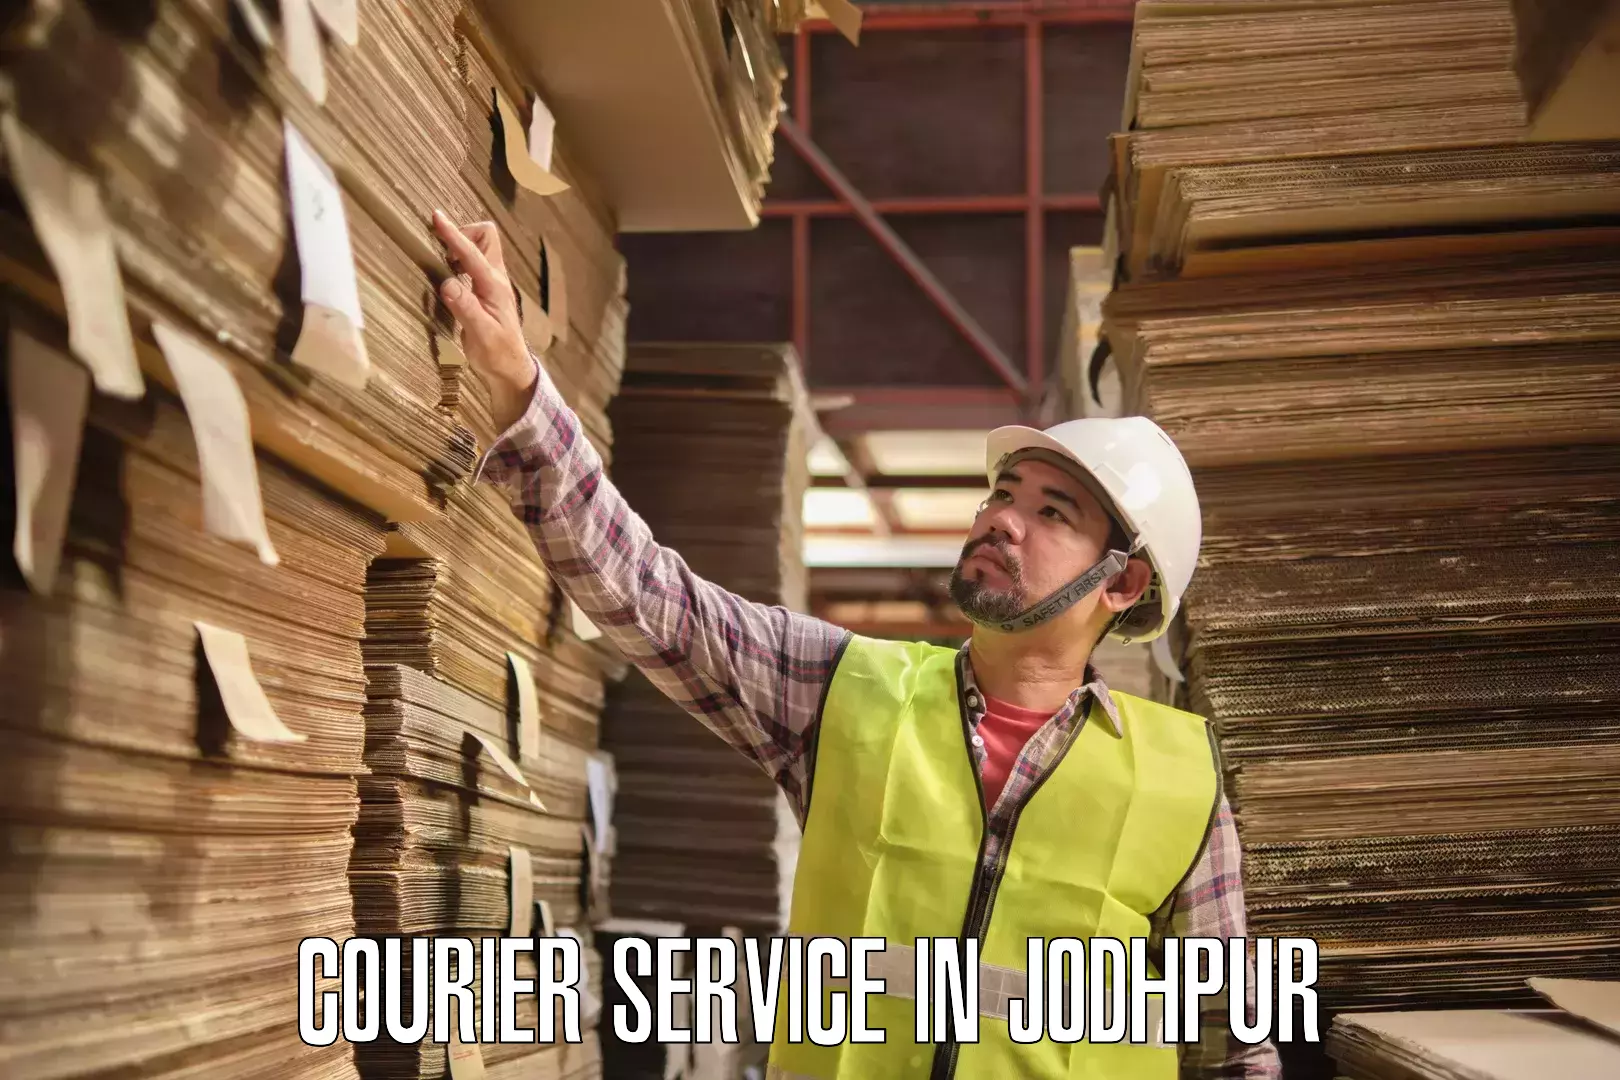 Scheduled delivery in Jodhpur